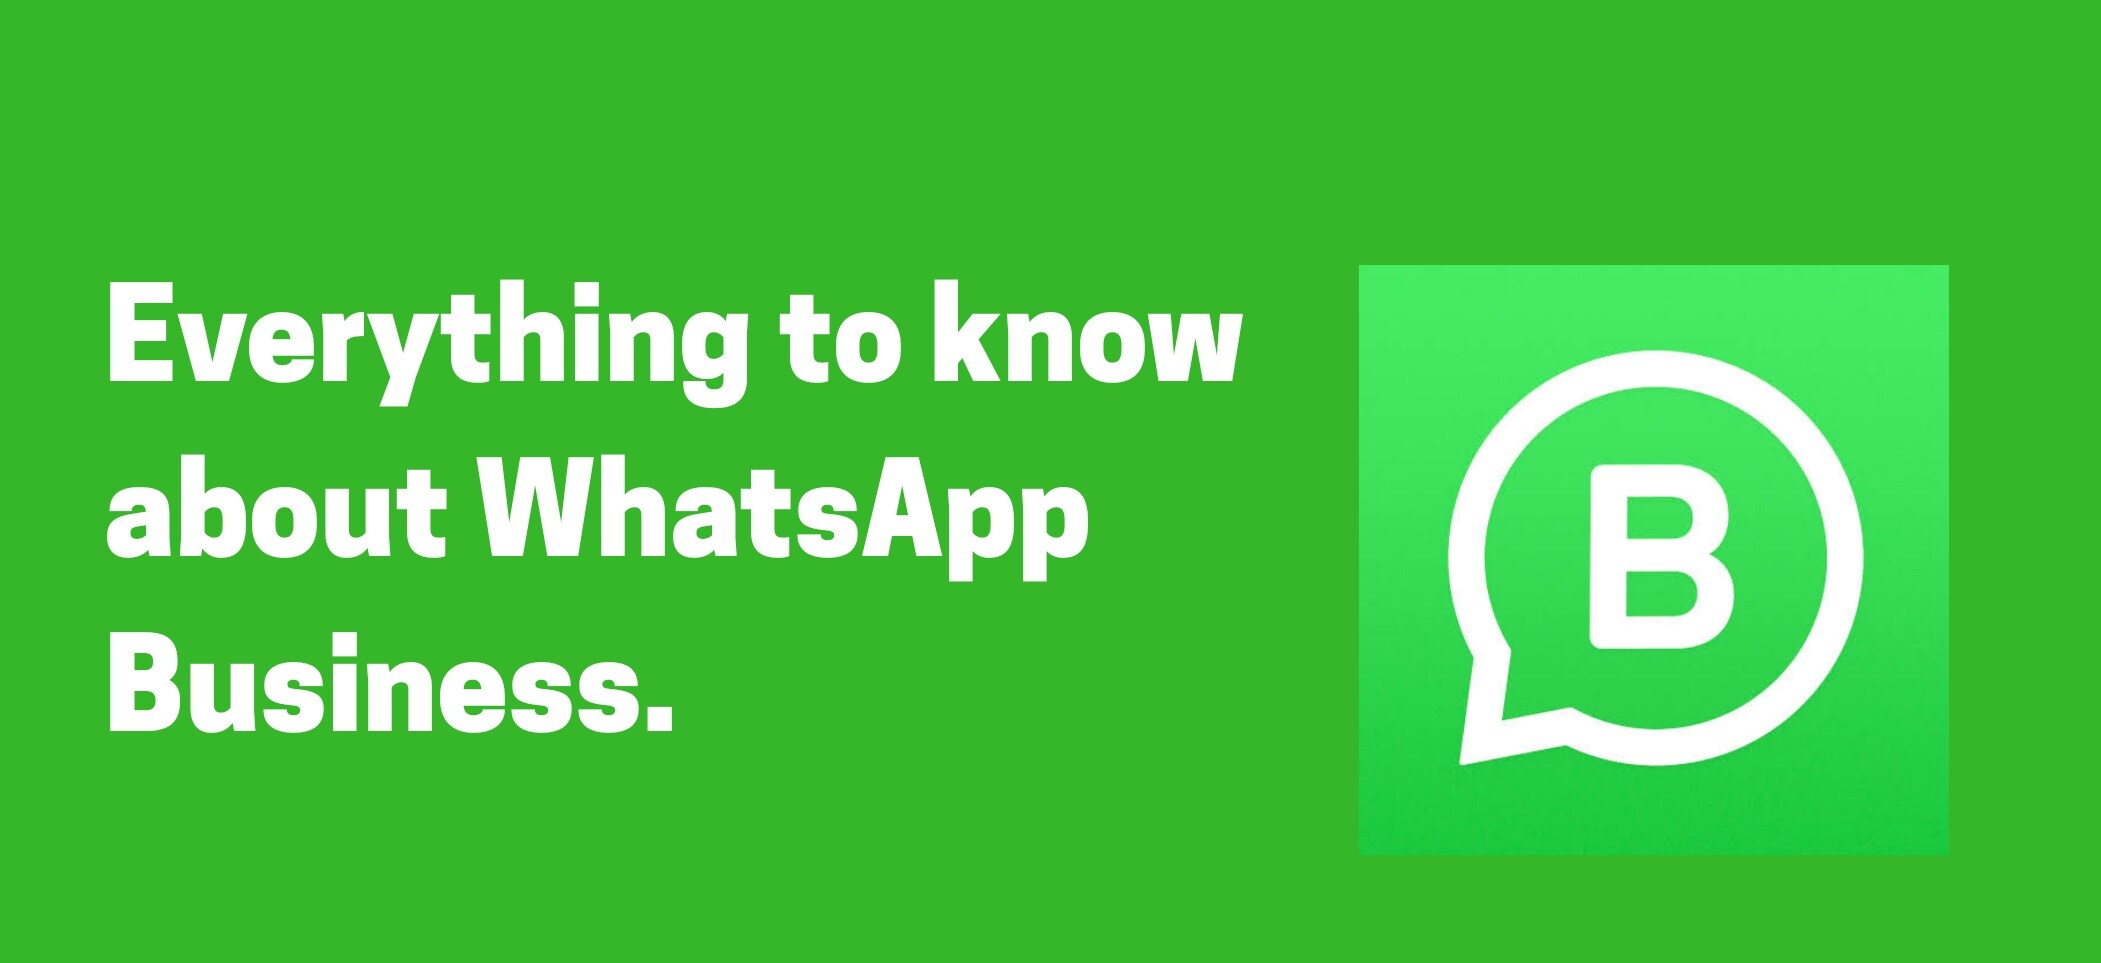 things to remember verifying whatsapp business